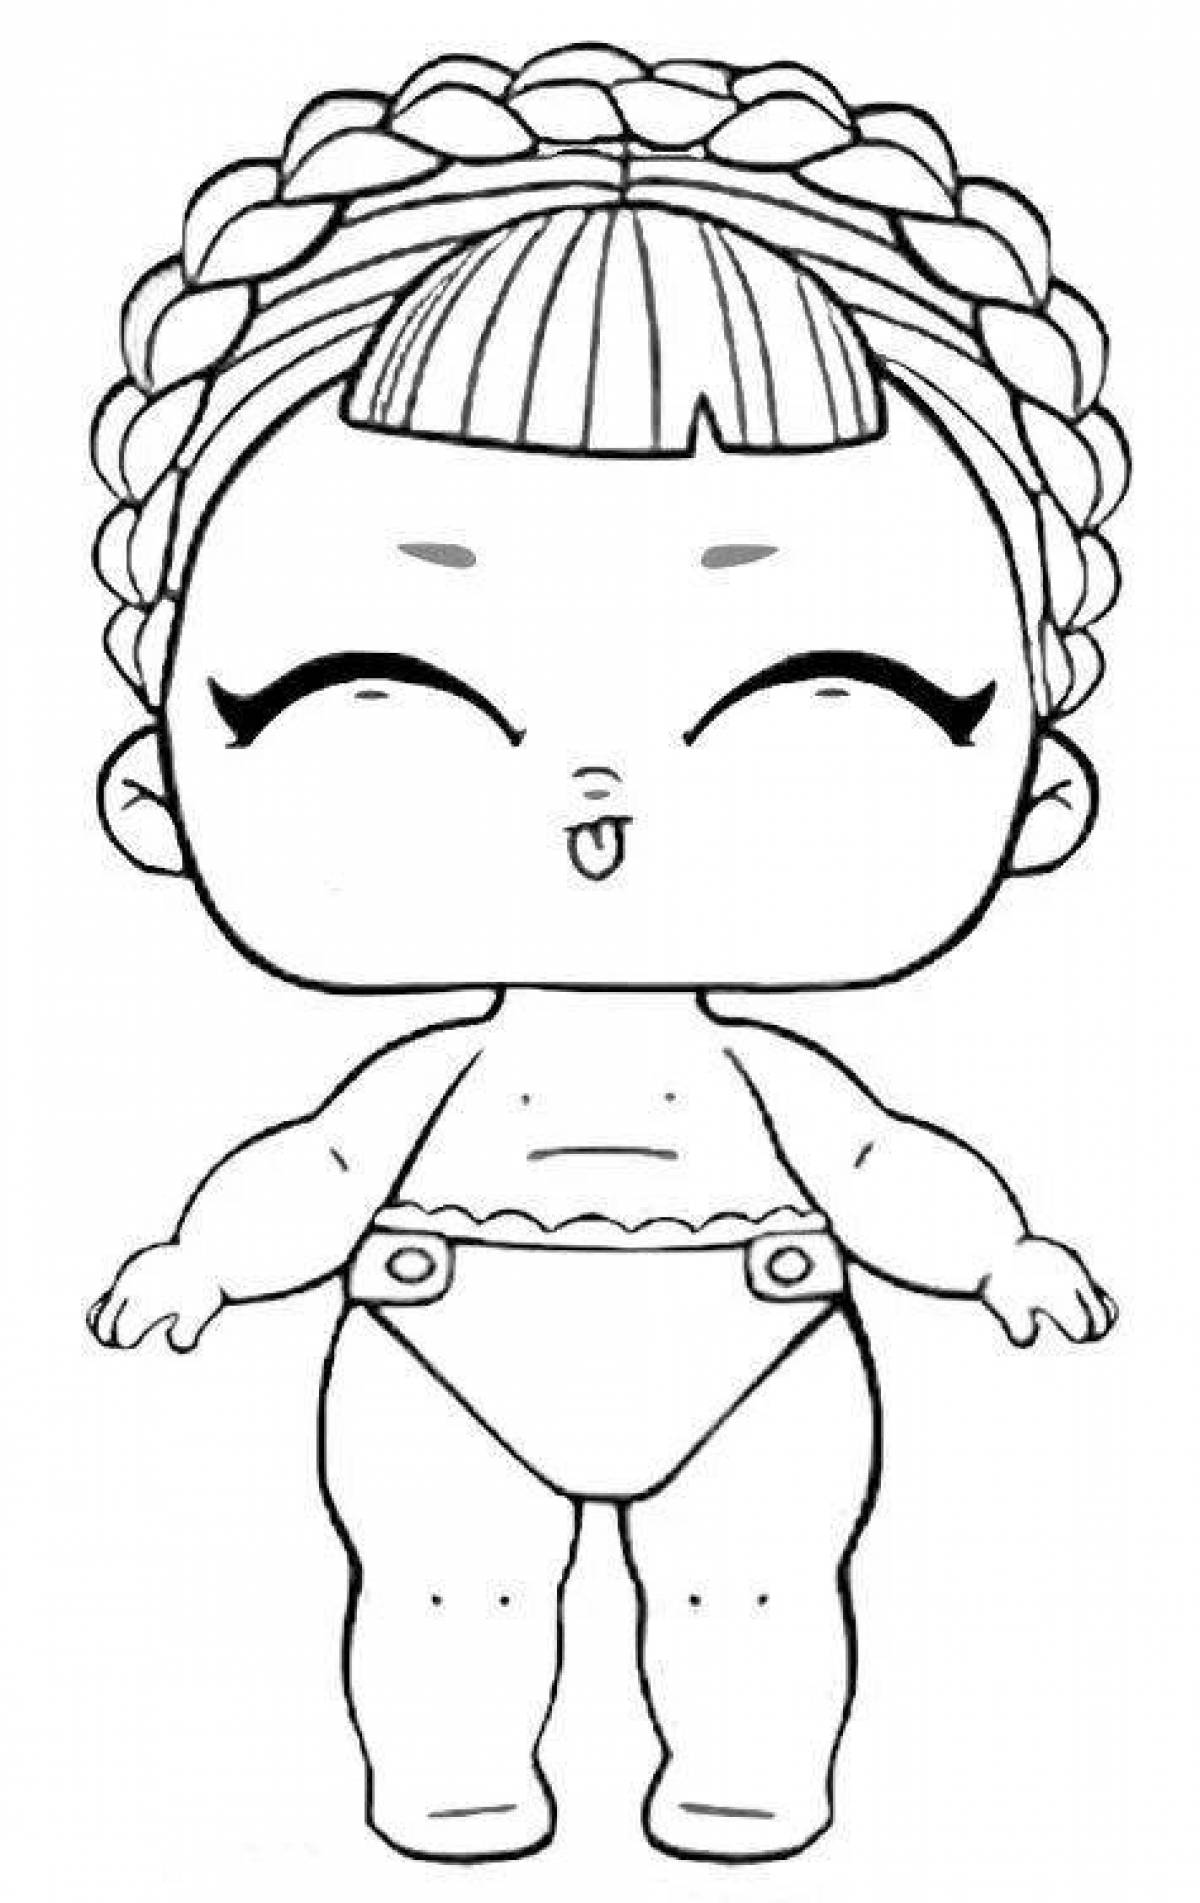 Live coloring baby doll